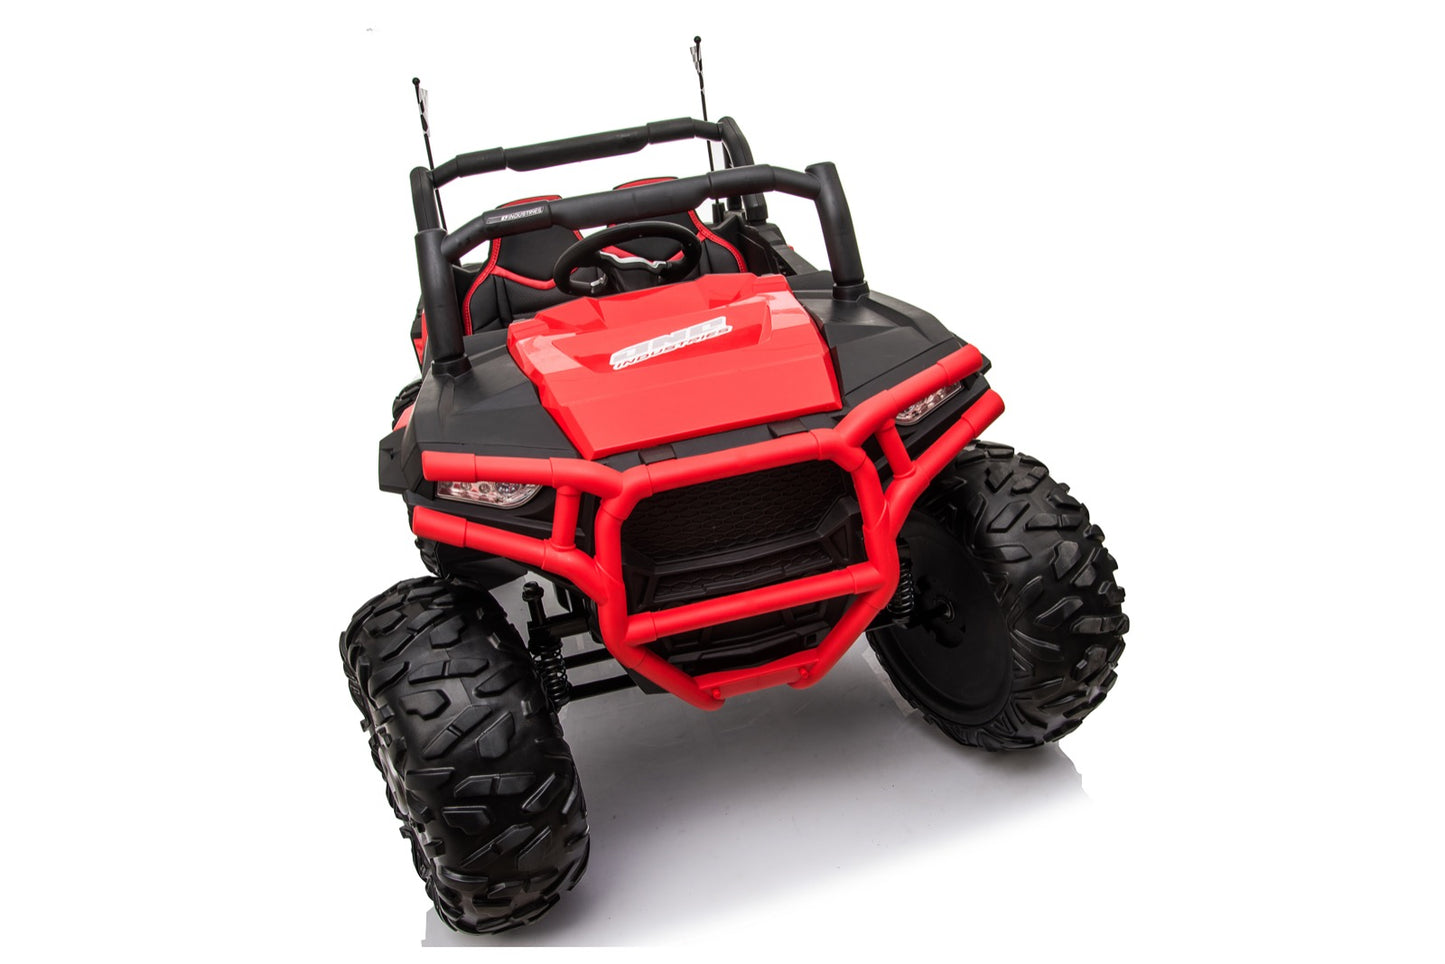 24V UTV 2 Seater DELUXE Twin 200w Motor Kids Ride On Car with Remote Control, Rubber Tire